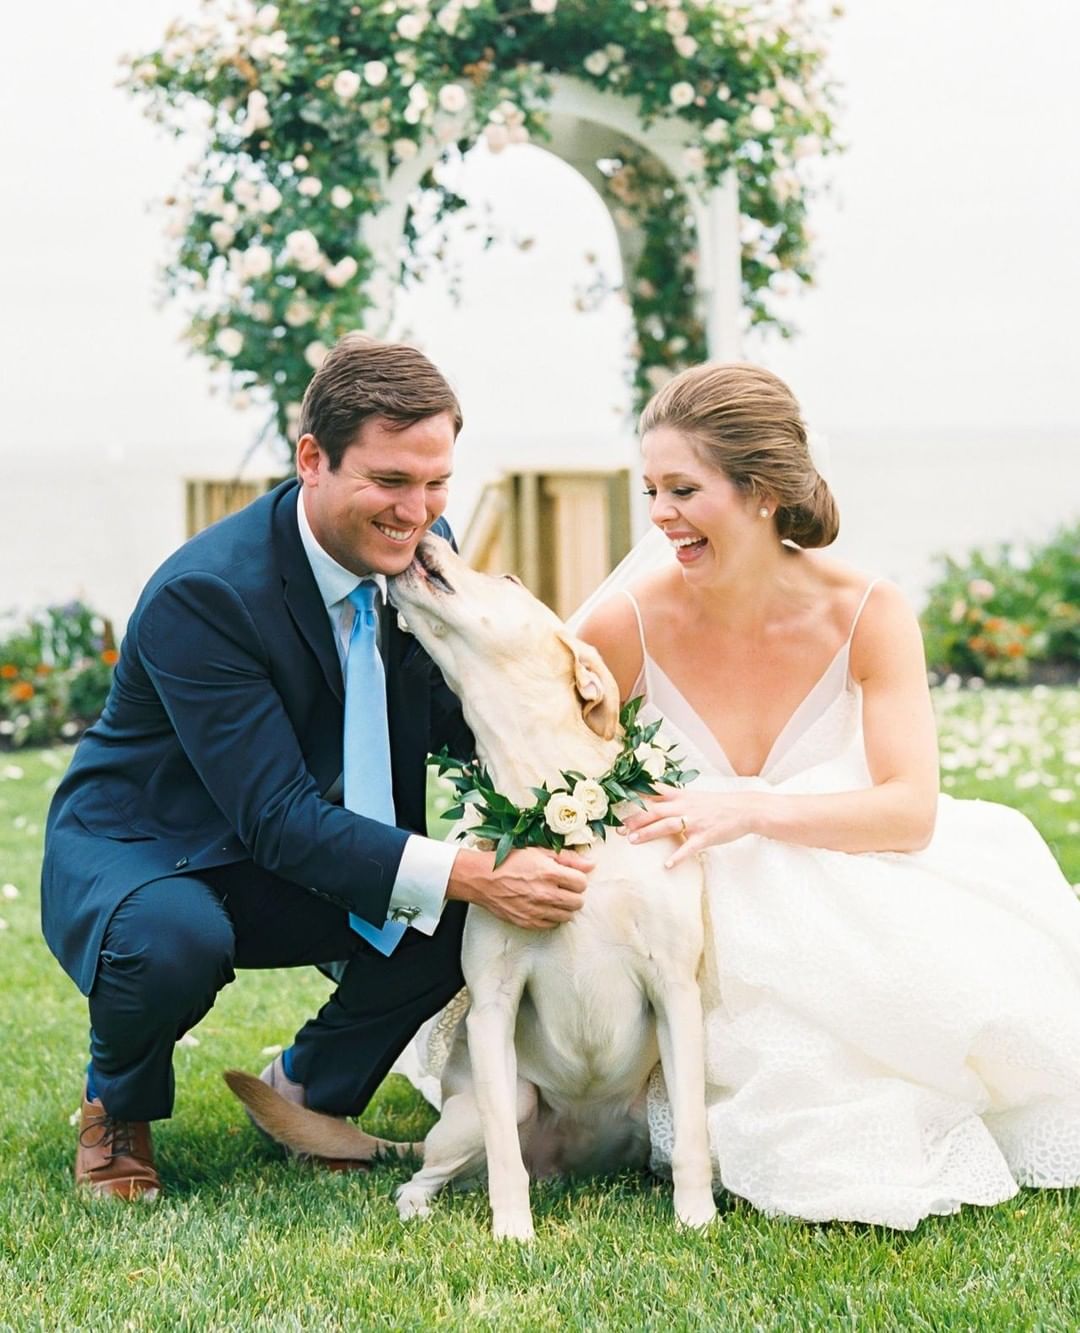 WARNING: These ridiculously cute pictures of dogs in weddings will make your day much better. // Dog kisses are the best kisses. // mysweetengagement.com